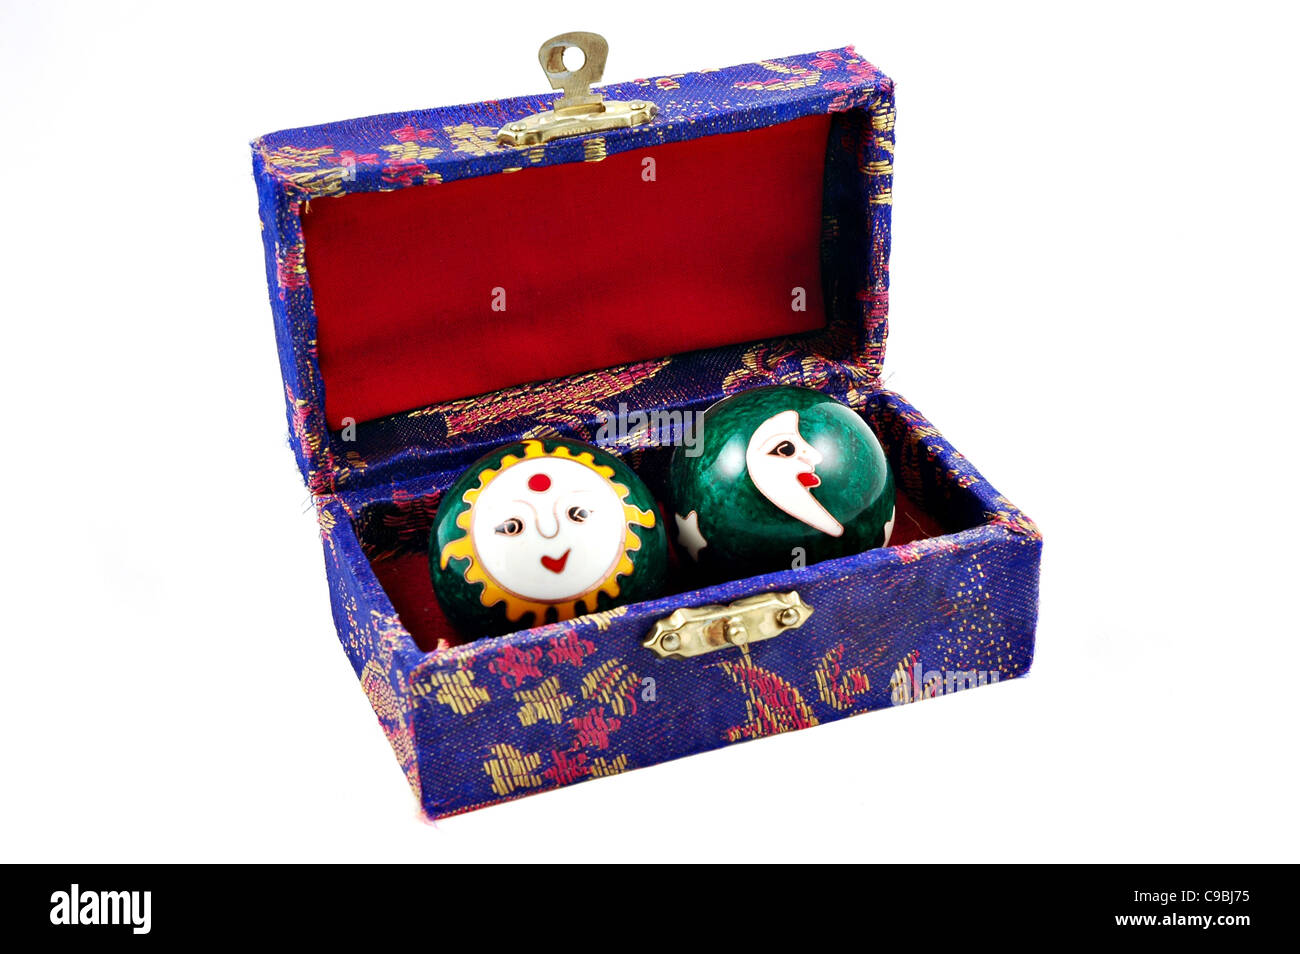 Two therapy balls with a sun and moon design in a gift box Stock Photo